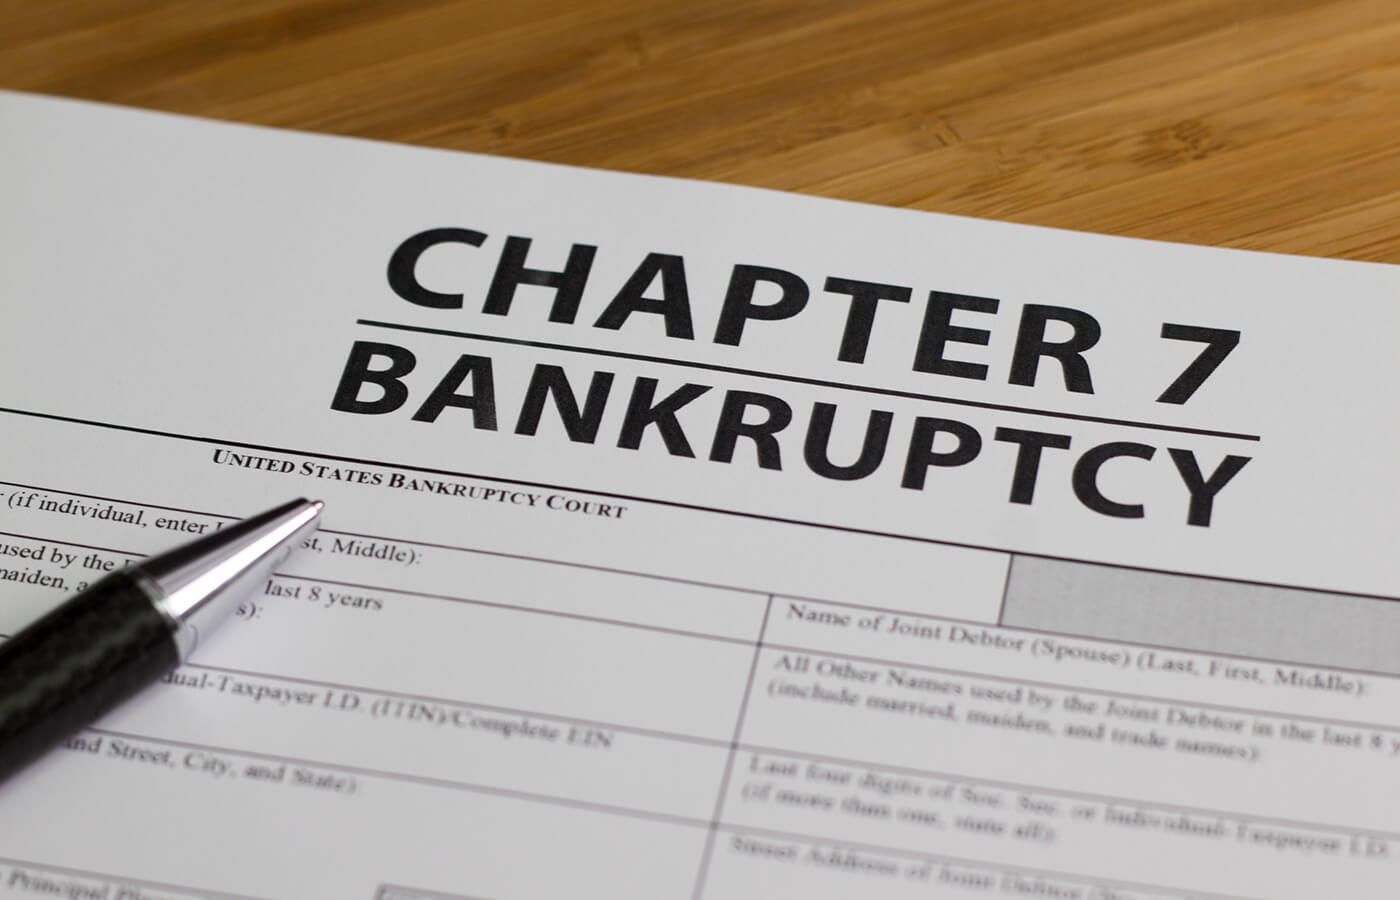 What Happens When a Chapter 13 Case Is Dismissed?